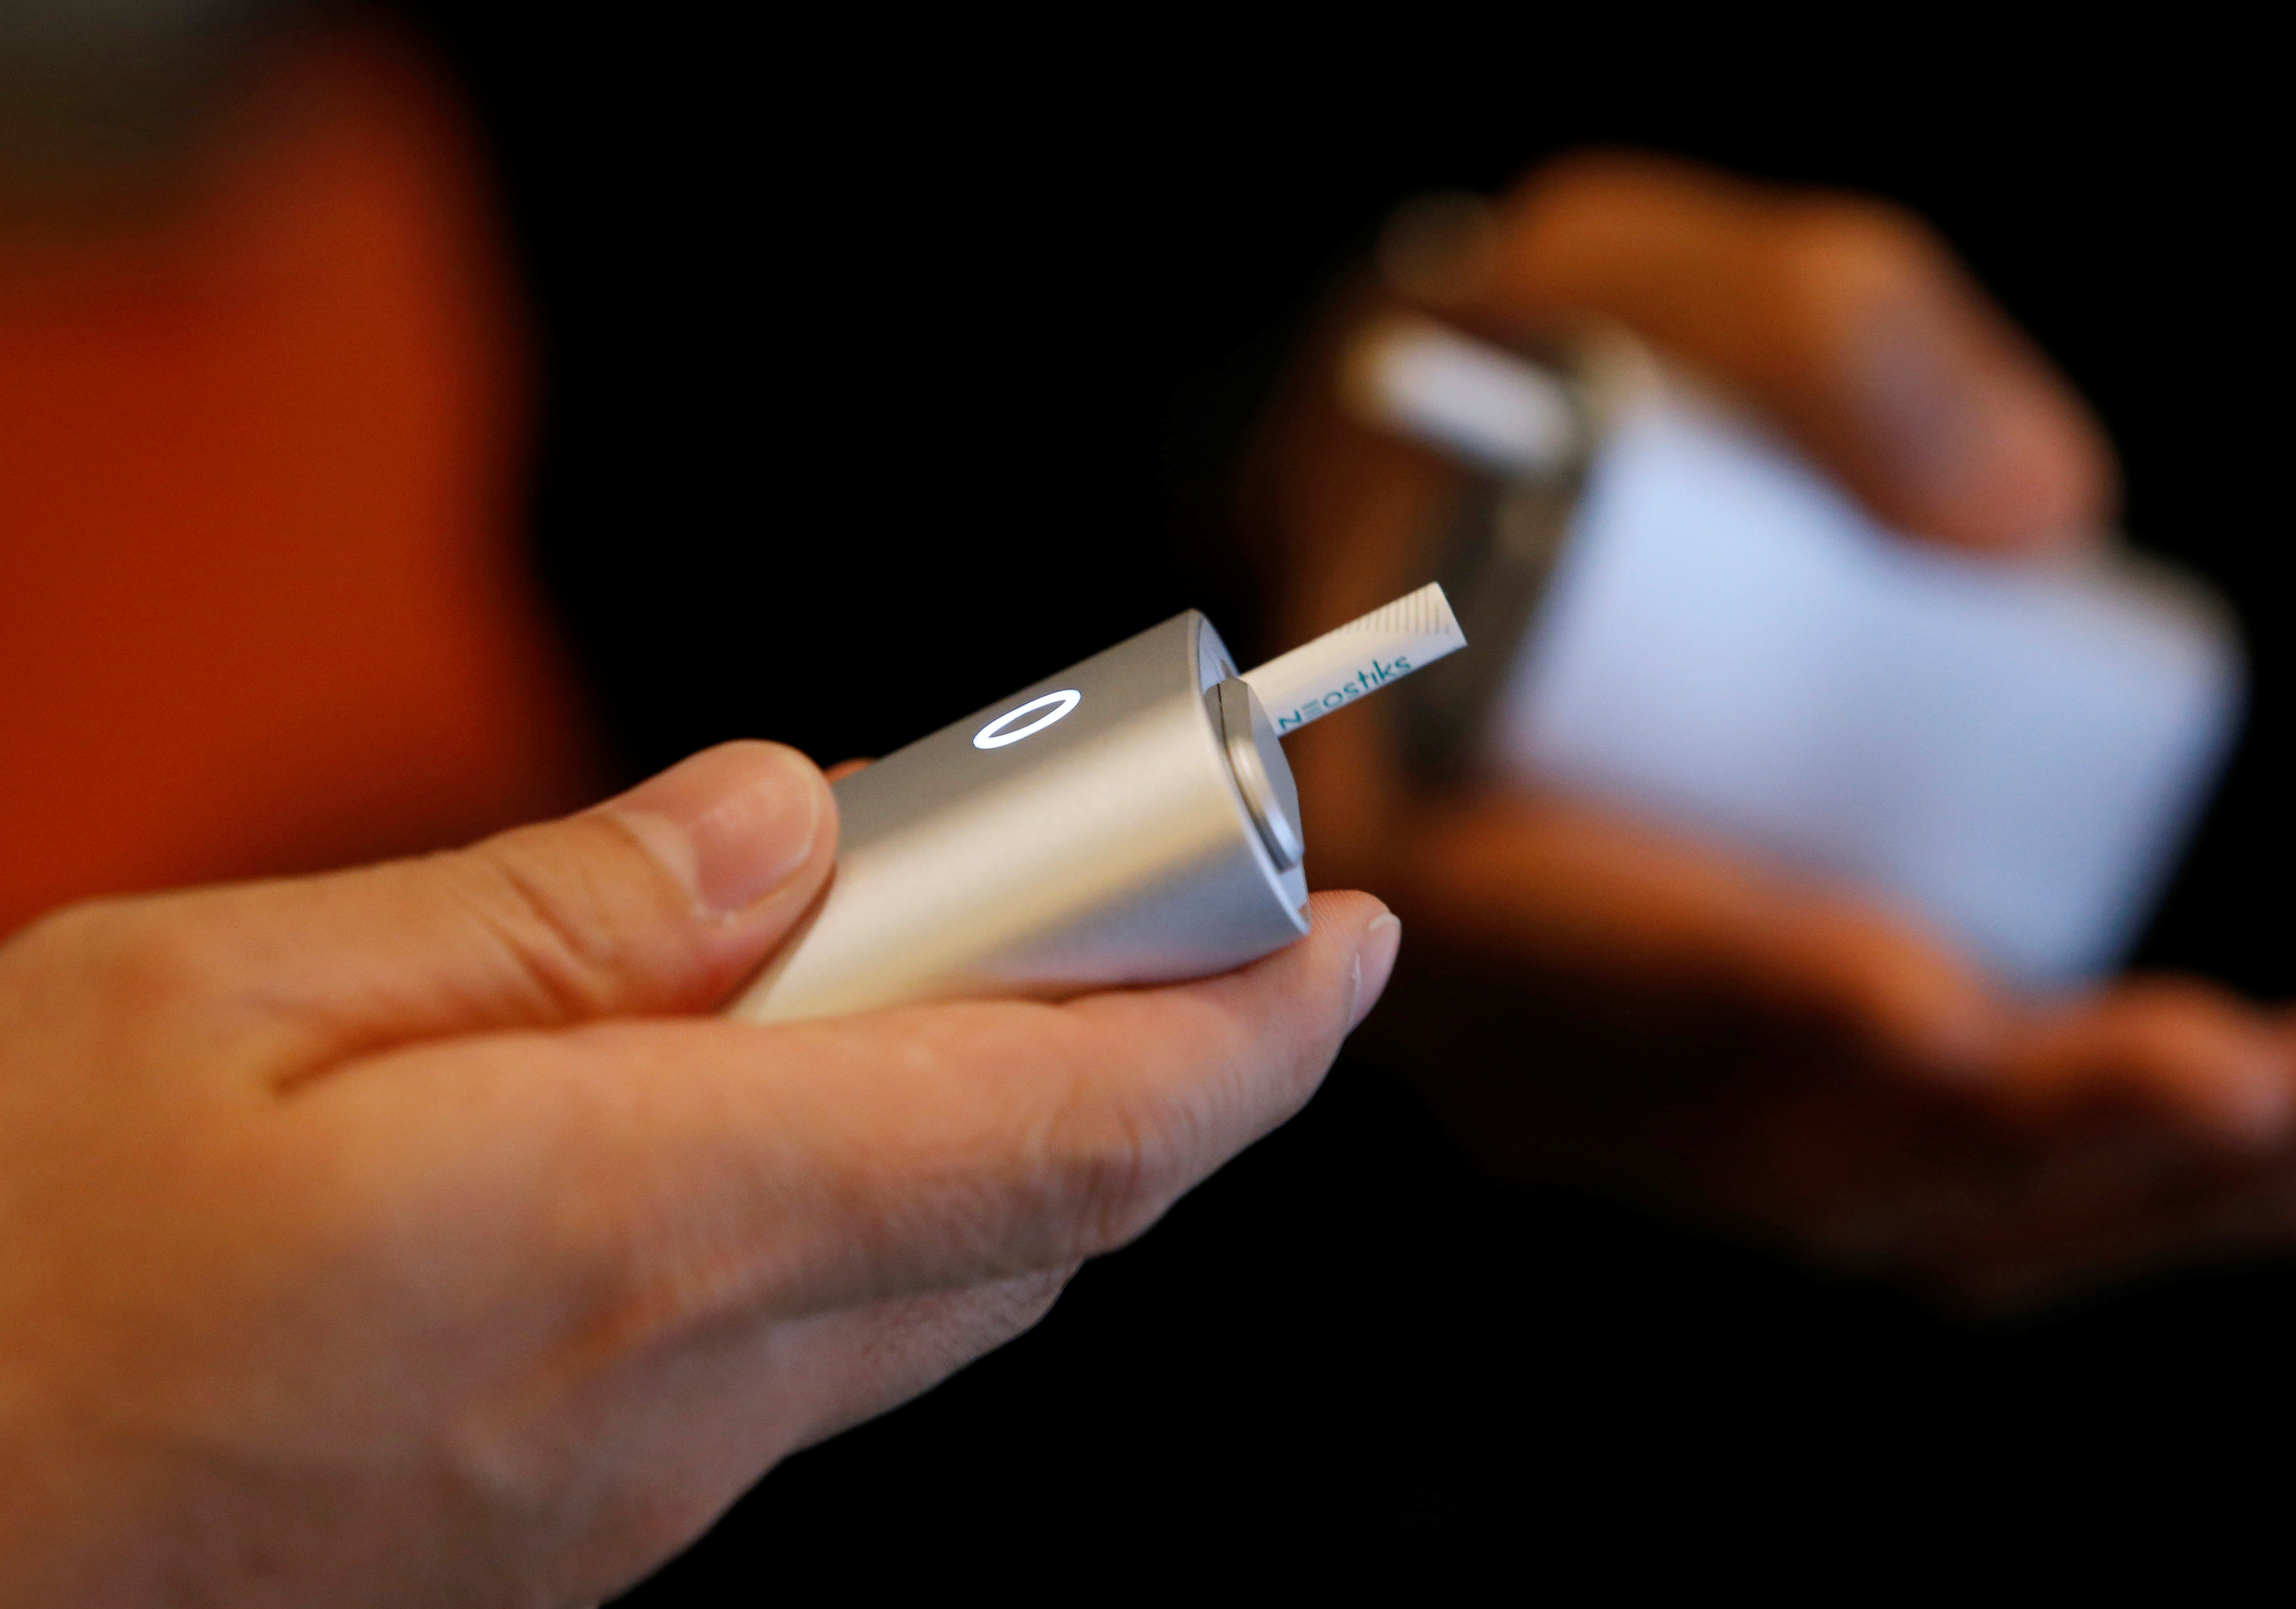 Attendees try British American Tobacco's new tobacco heating system device 'glo' after a news conference in Tokyo, Japan